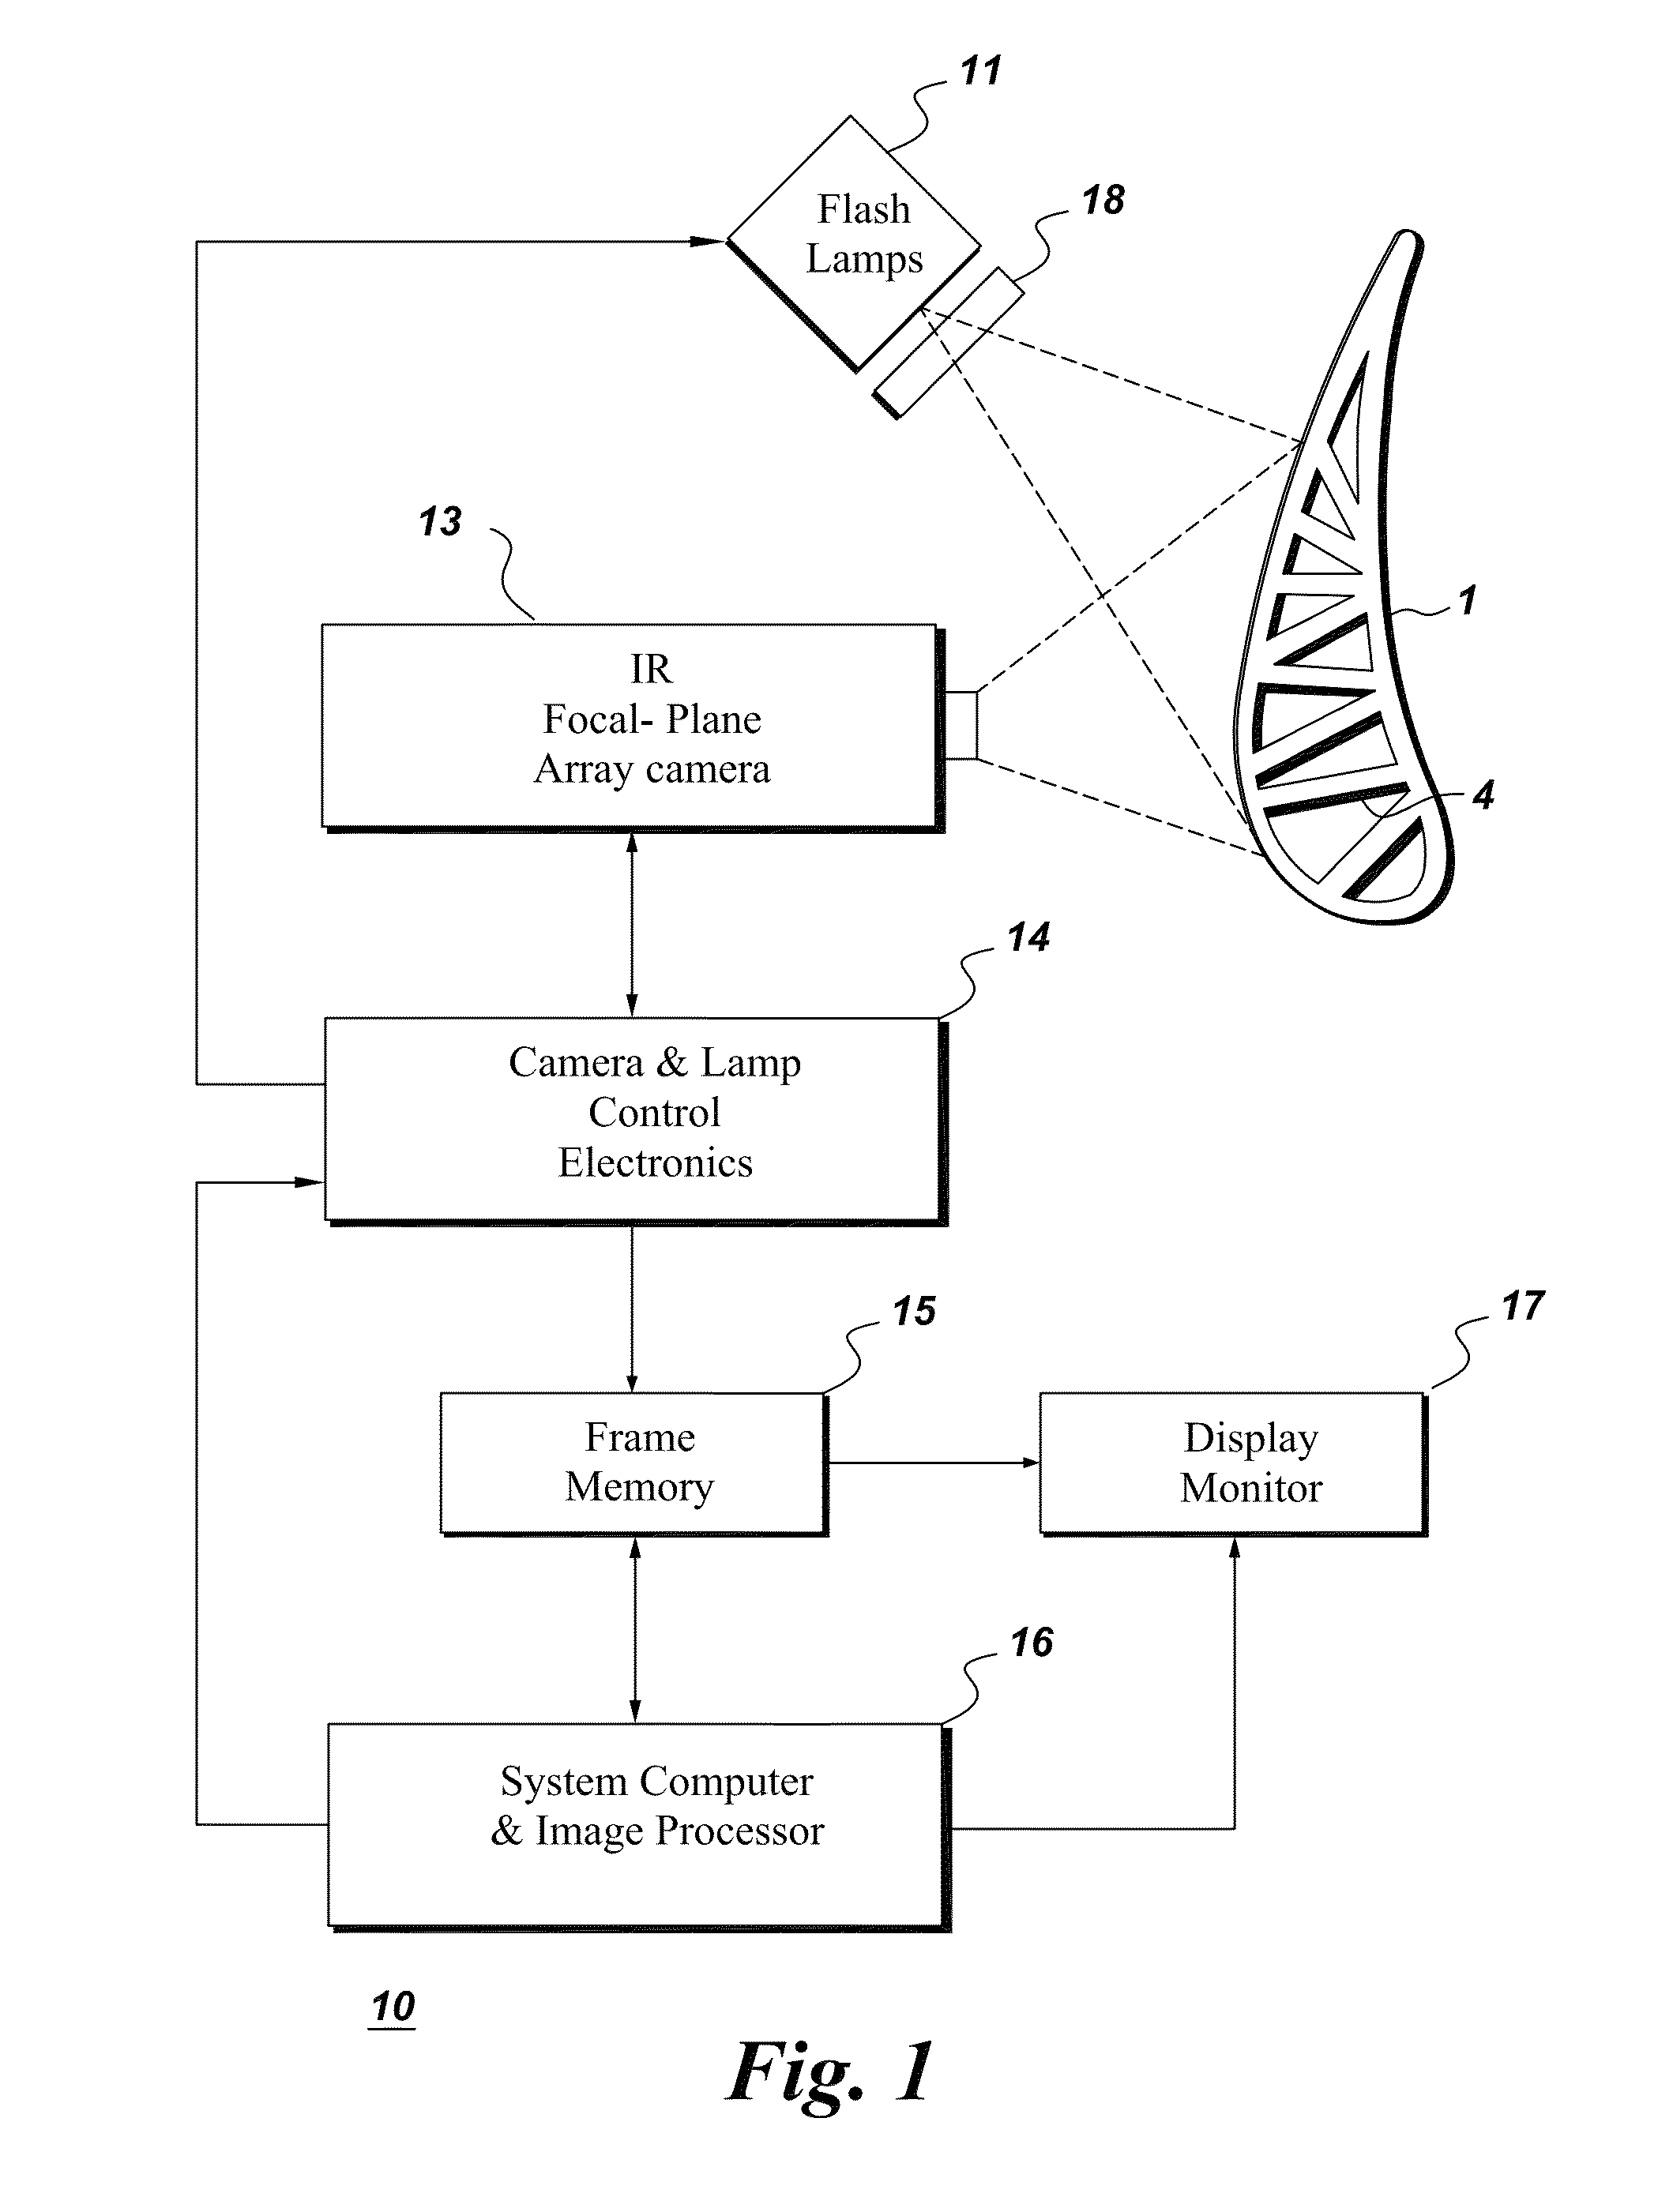 Thermal imaging method and apparatus for evaluating coatings